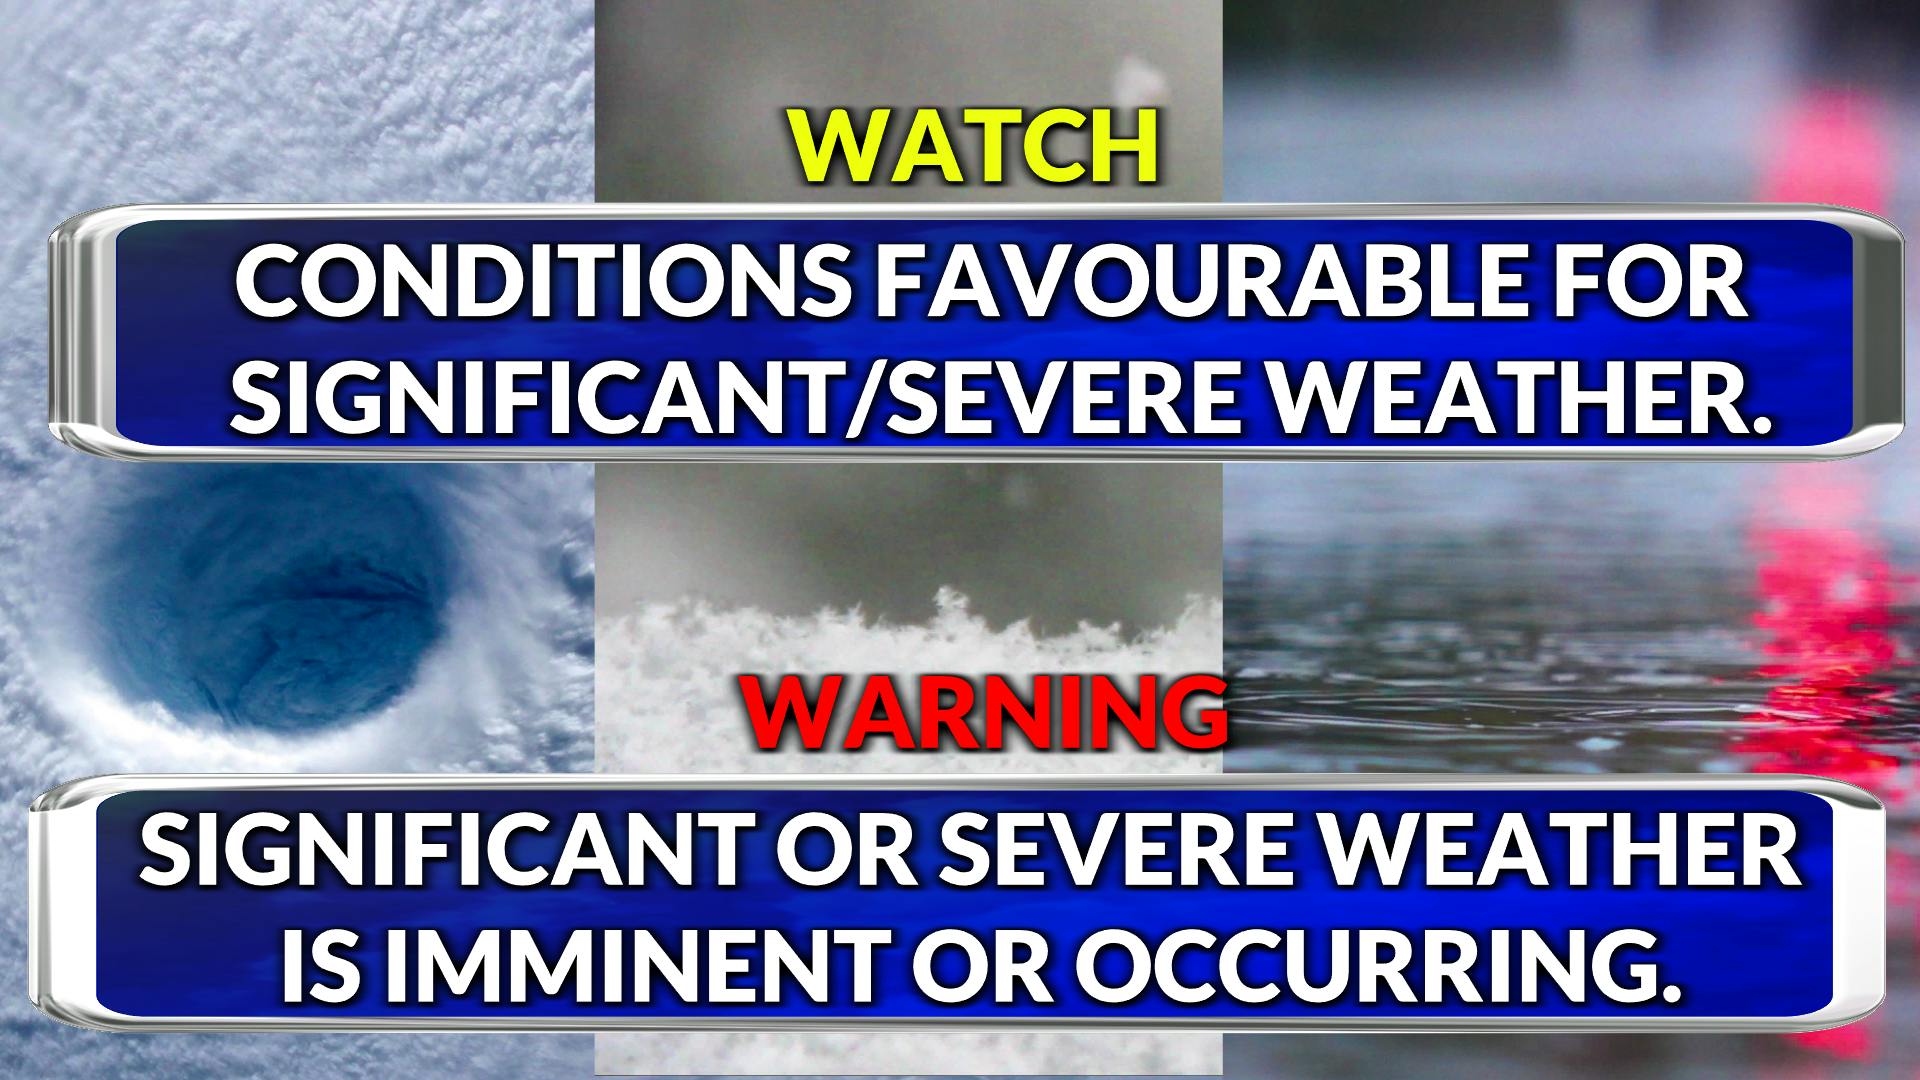 It's important to pay attention to weather-related watches and warnings anytime of year.